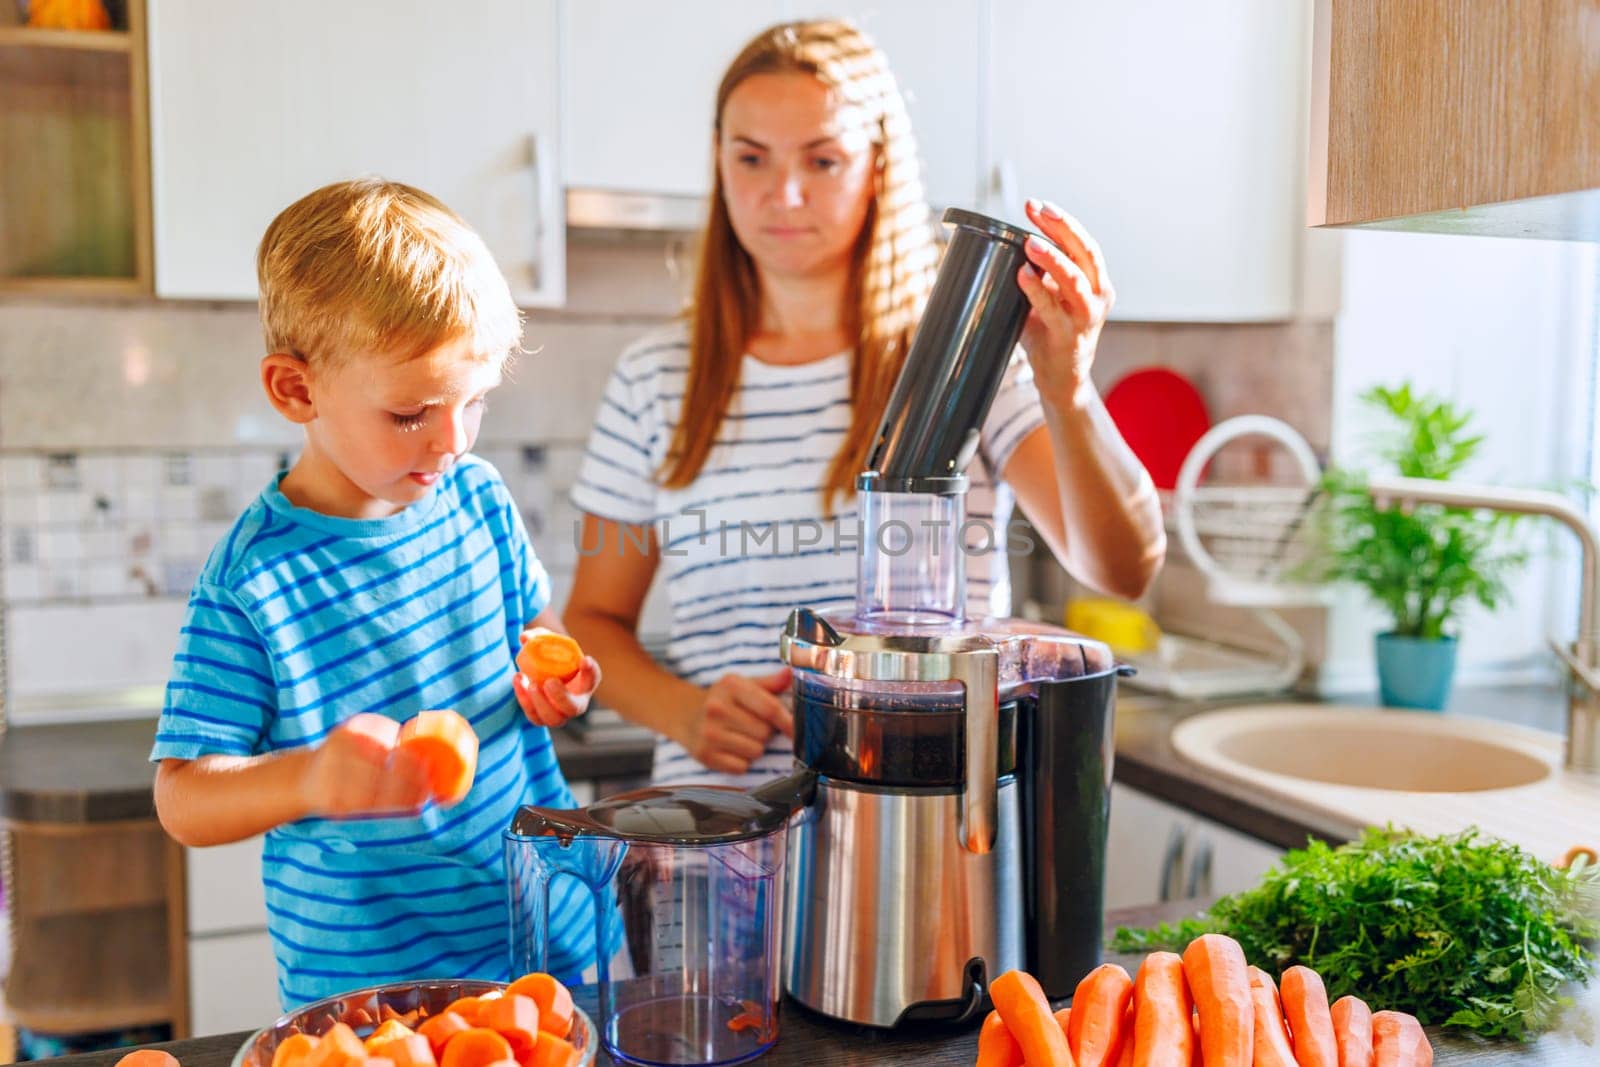 In a bright kitchen, a mother and her young son prepare healthy carrot juice using a juicer, enjoying a moment of family bonding.